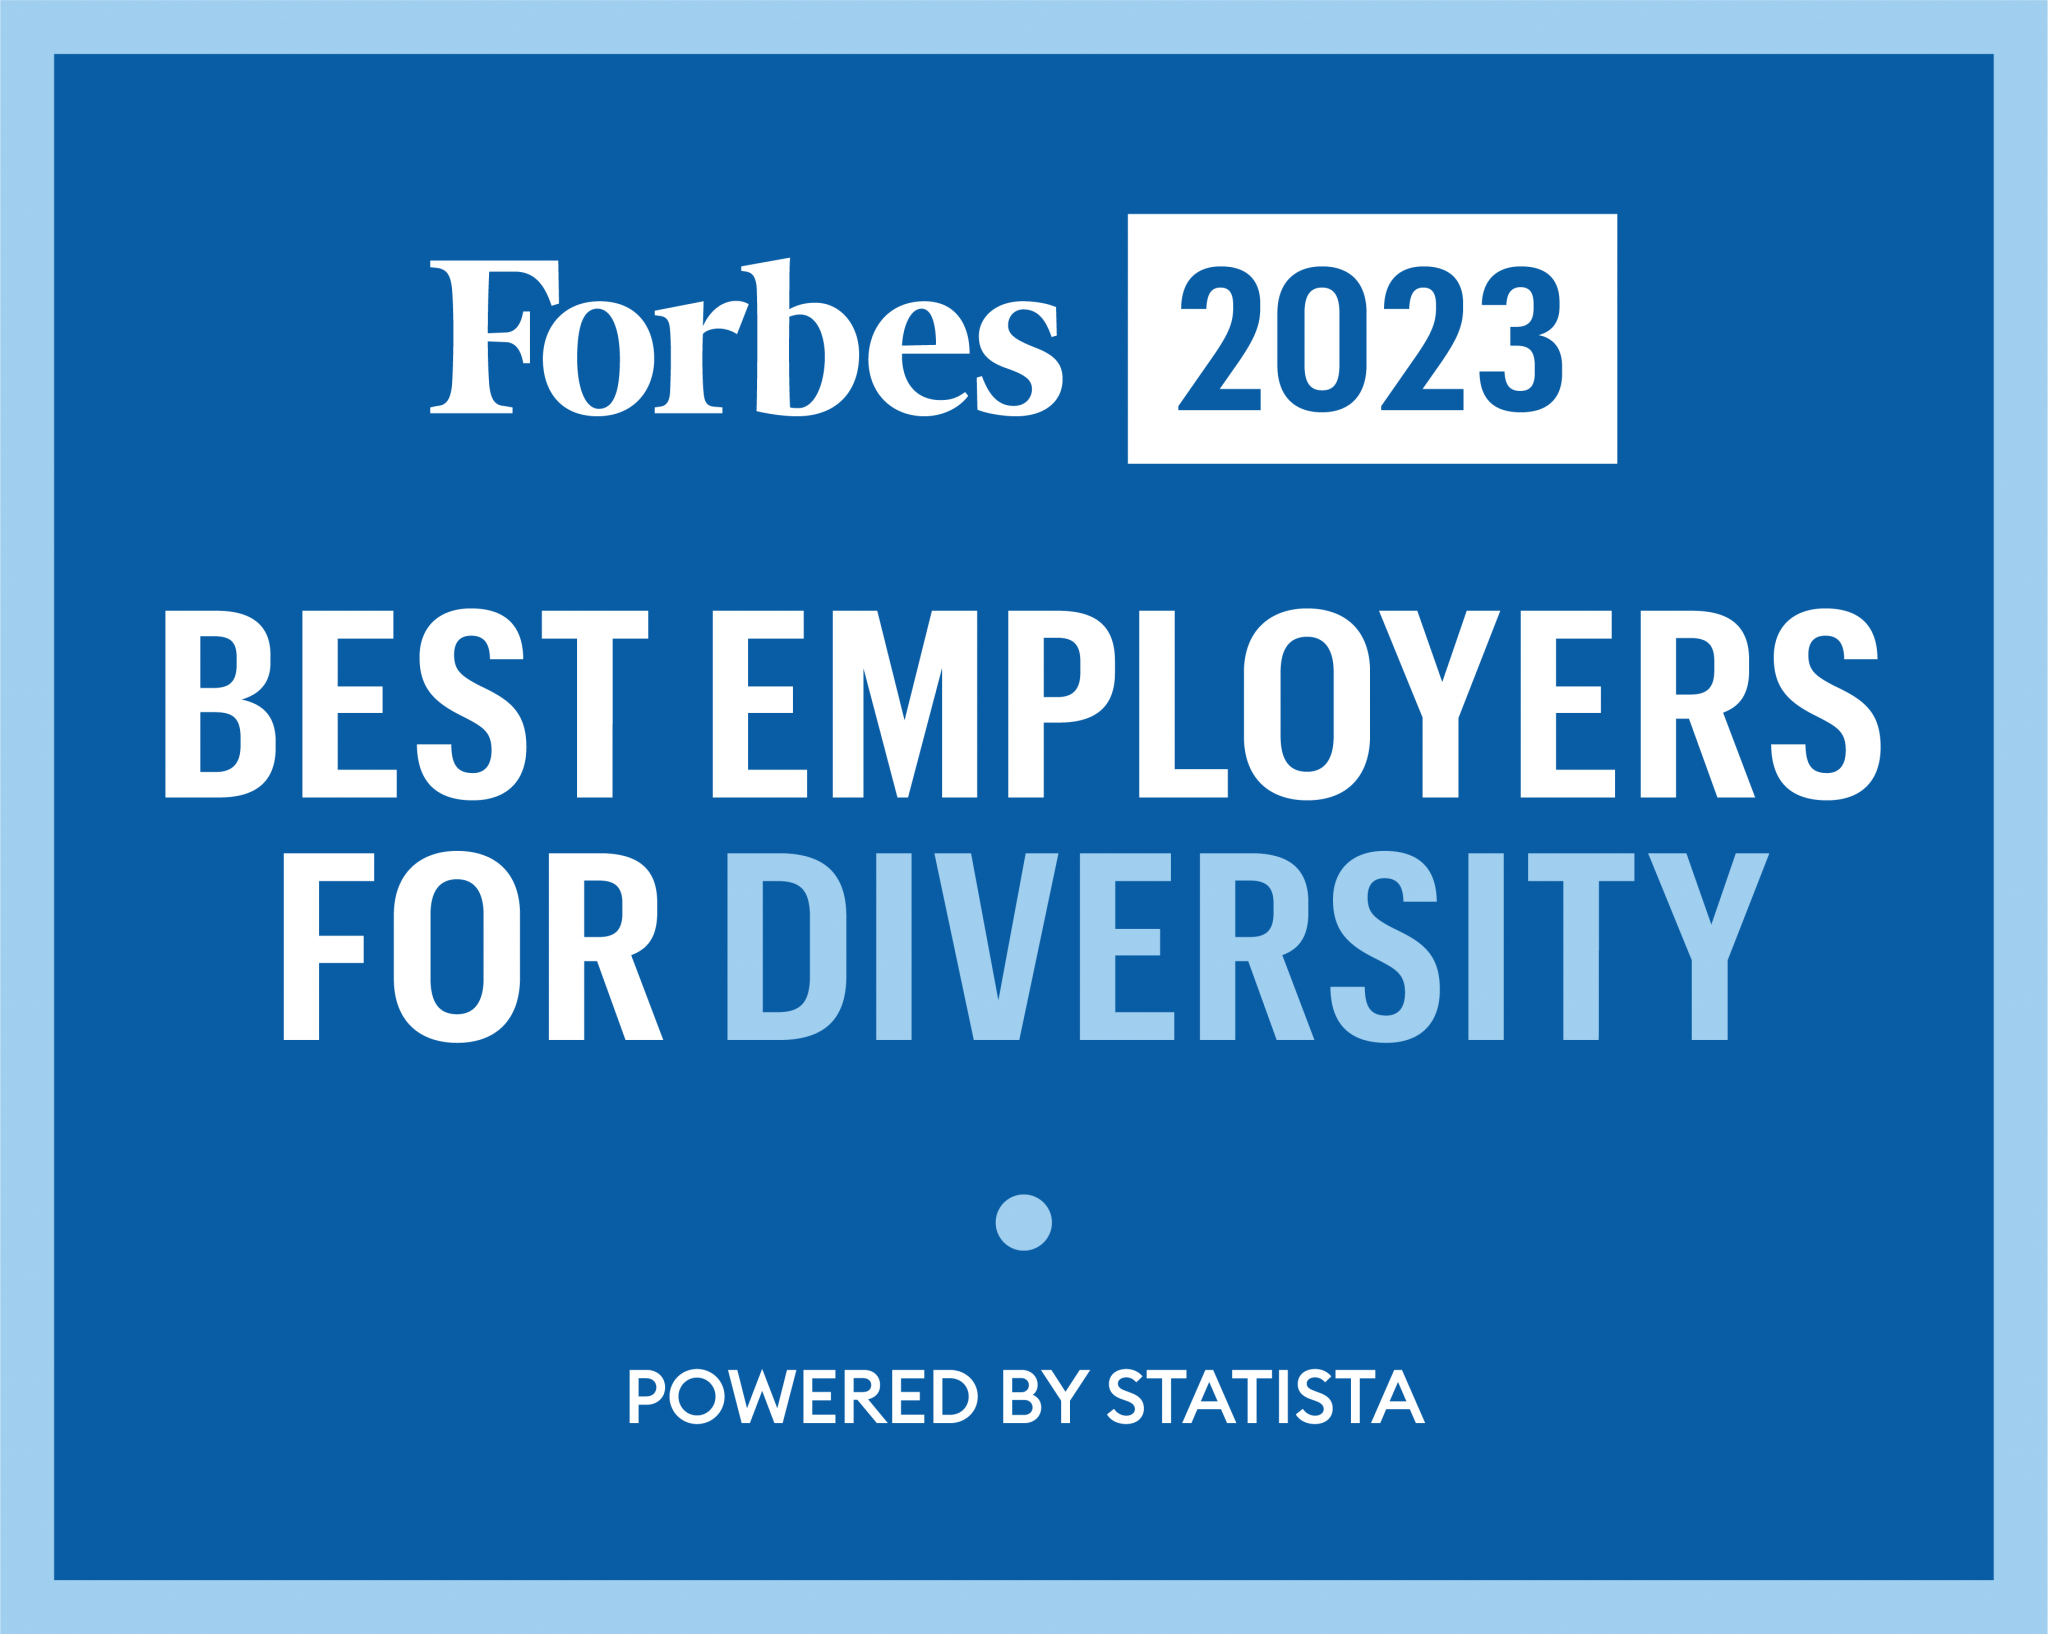 Autodesk recognized by Forbes as a Best Employer for Diversity 2023